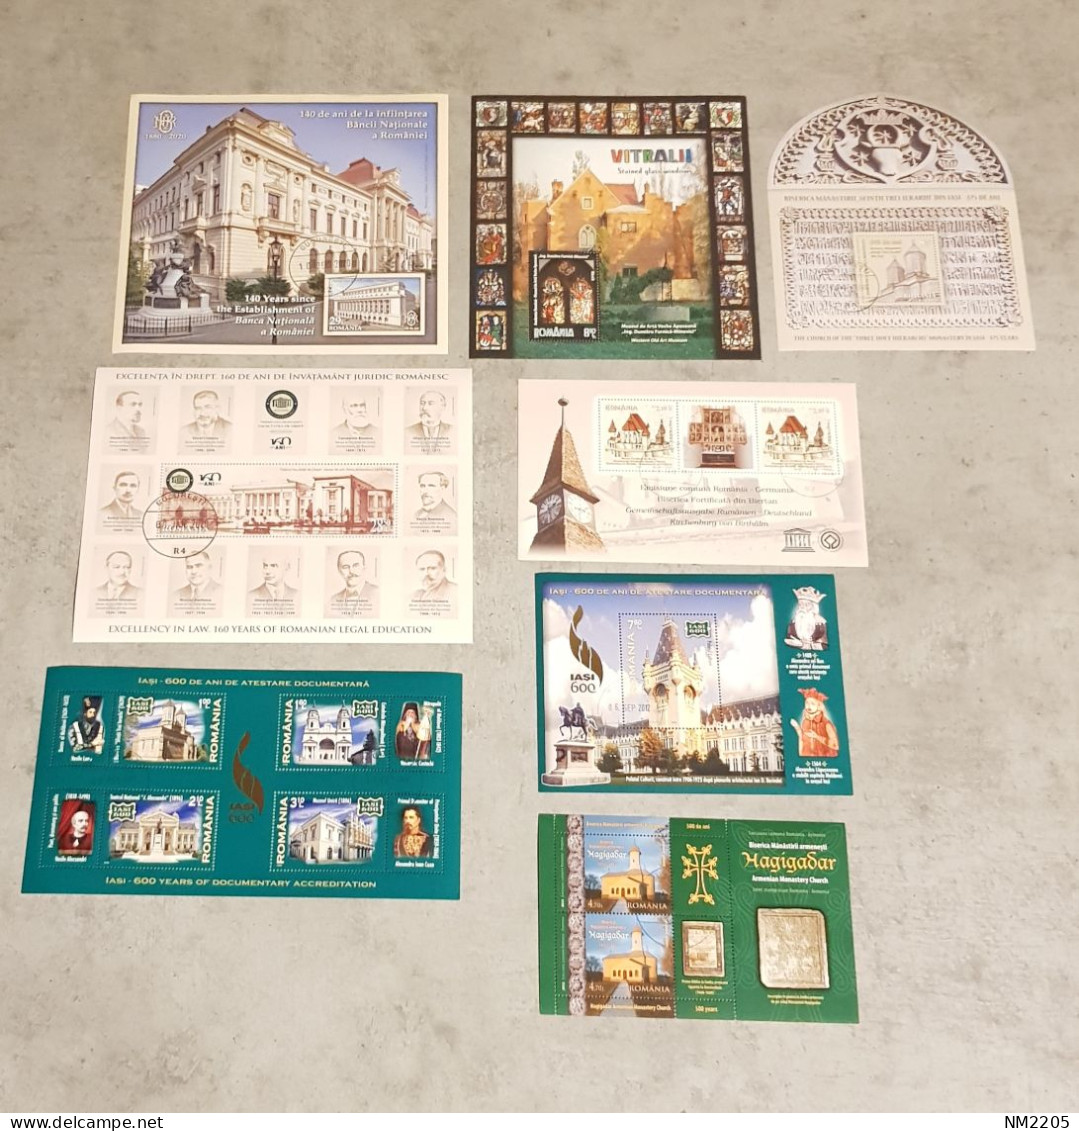 ROMANIA ARCHITECTURE AND HISTORY 8 SHEETS USED - Gebraucht